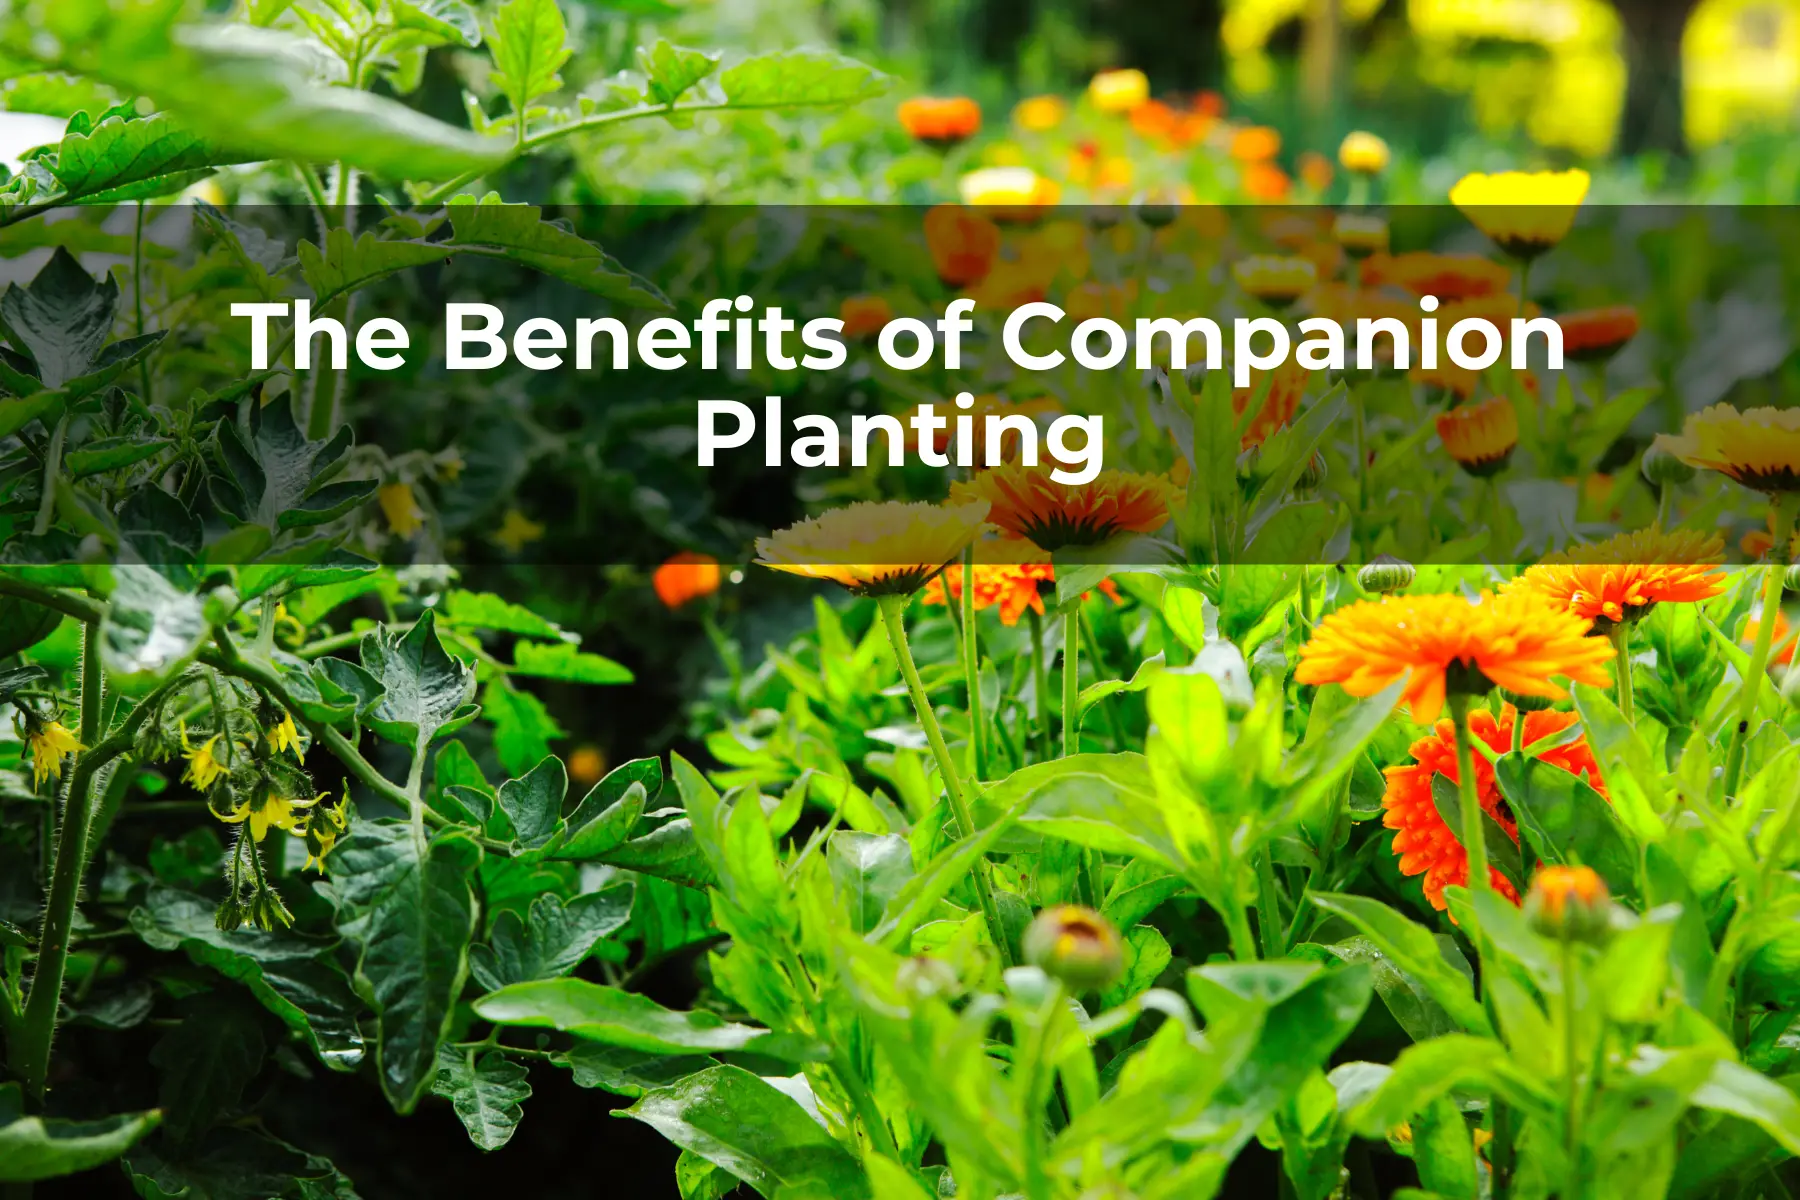 The Benefits of Companion Planting